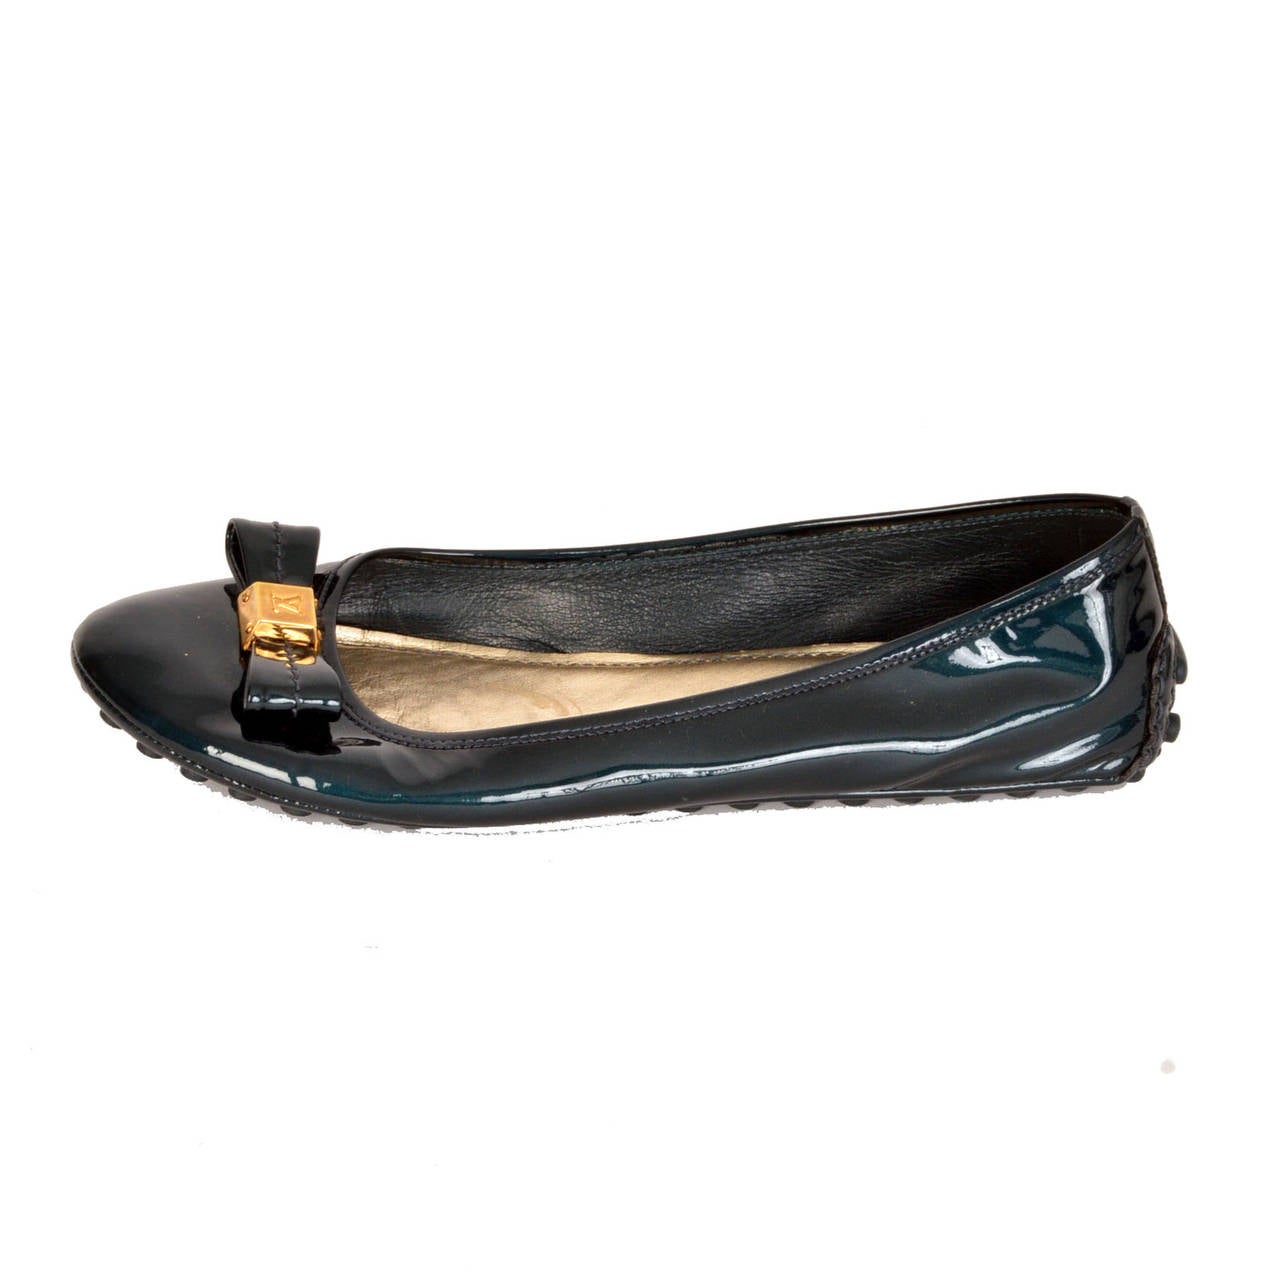 Louis Vuitton iridescent blue flats with bow 
Gold LV symbol on bow and Louis Vuitton label on back, textured bottom
- Condition: Like new, scratches on insoles
- Made in Italy
- Size 40